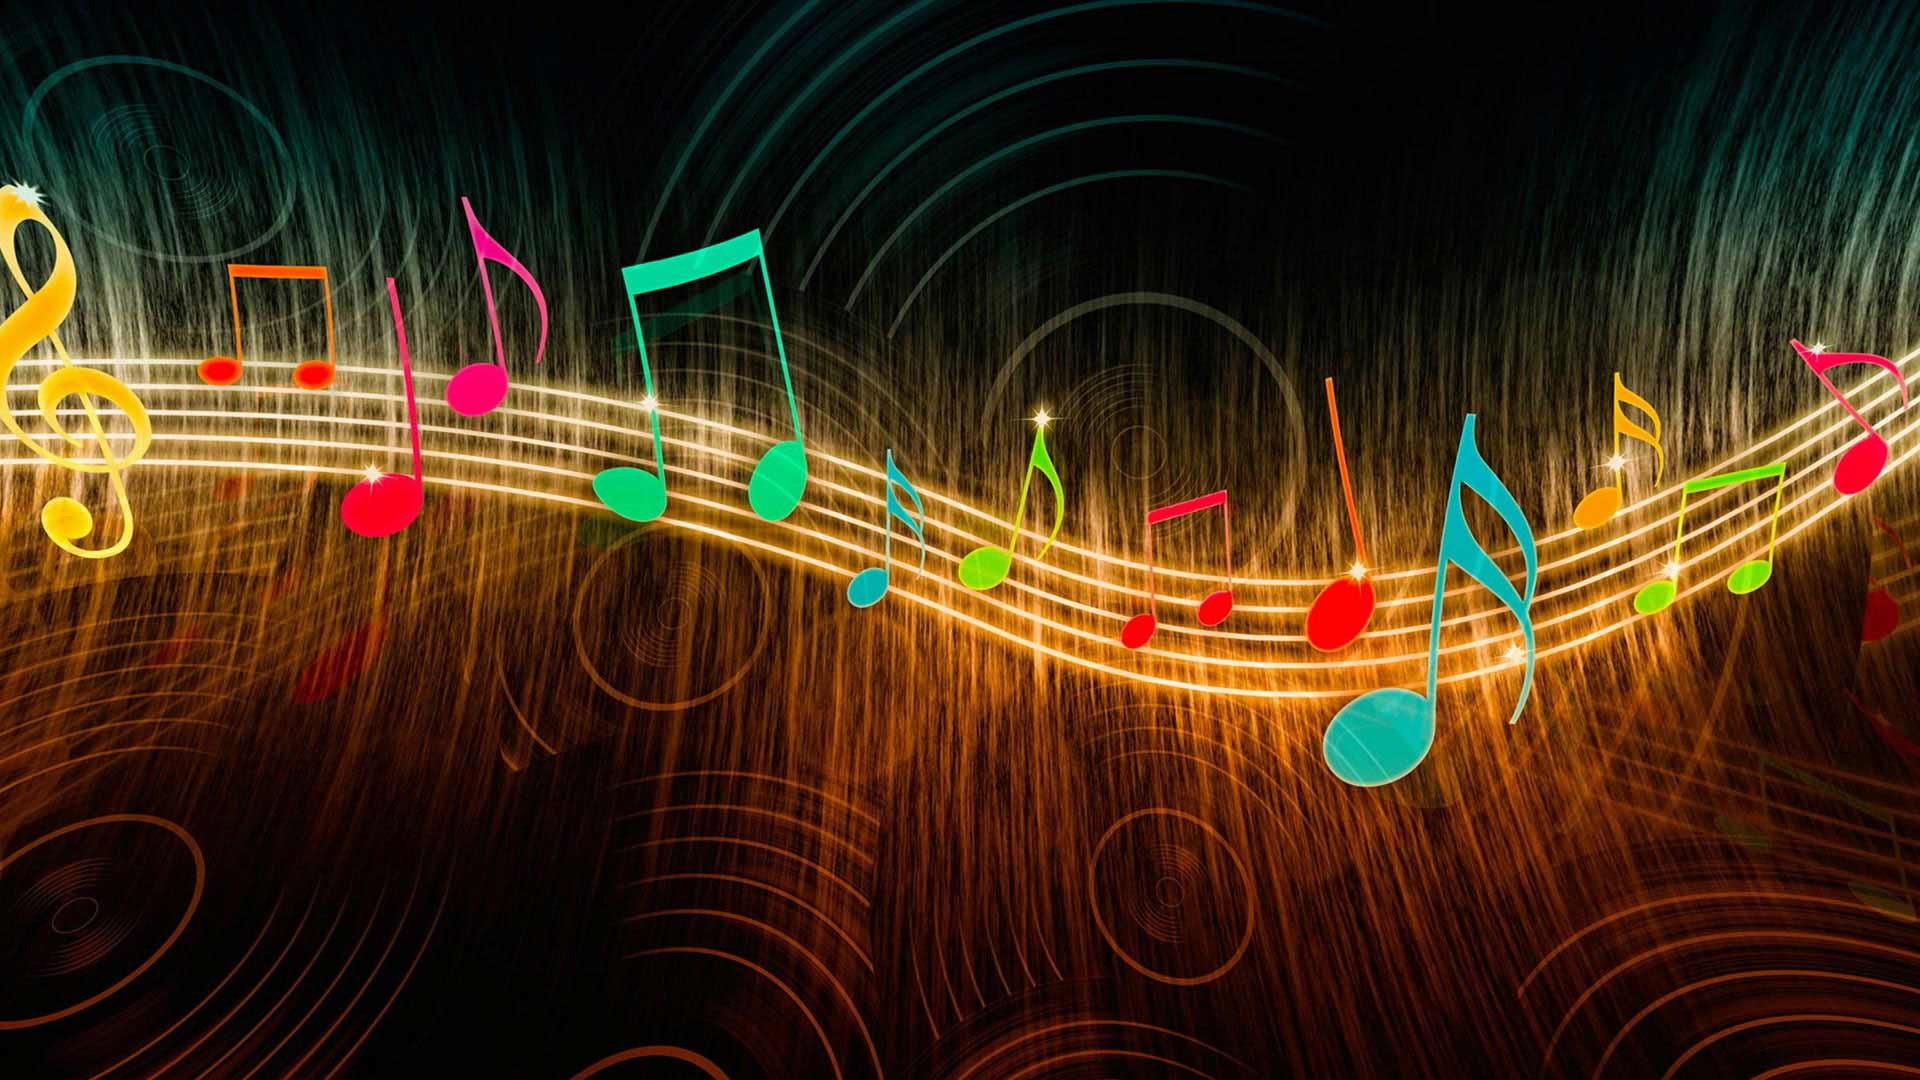 1920x1080 Colorful Music Notes Wallpaper - WallpaperSafari Â· Music Note clip art |  Clip Art | Pinterest | Clip art and Searching